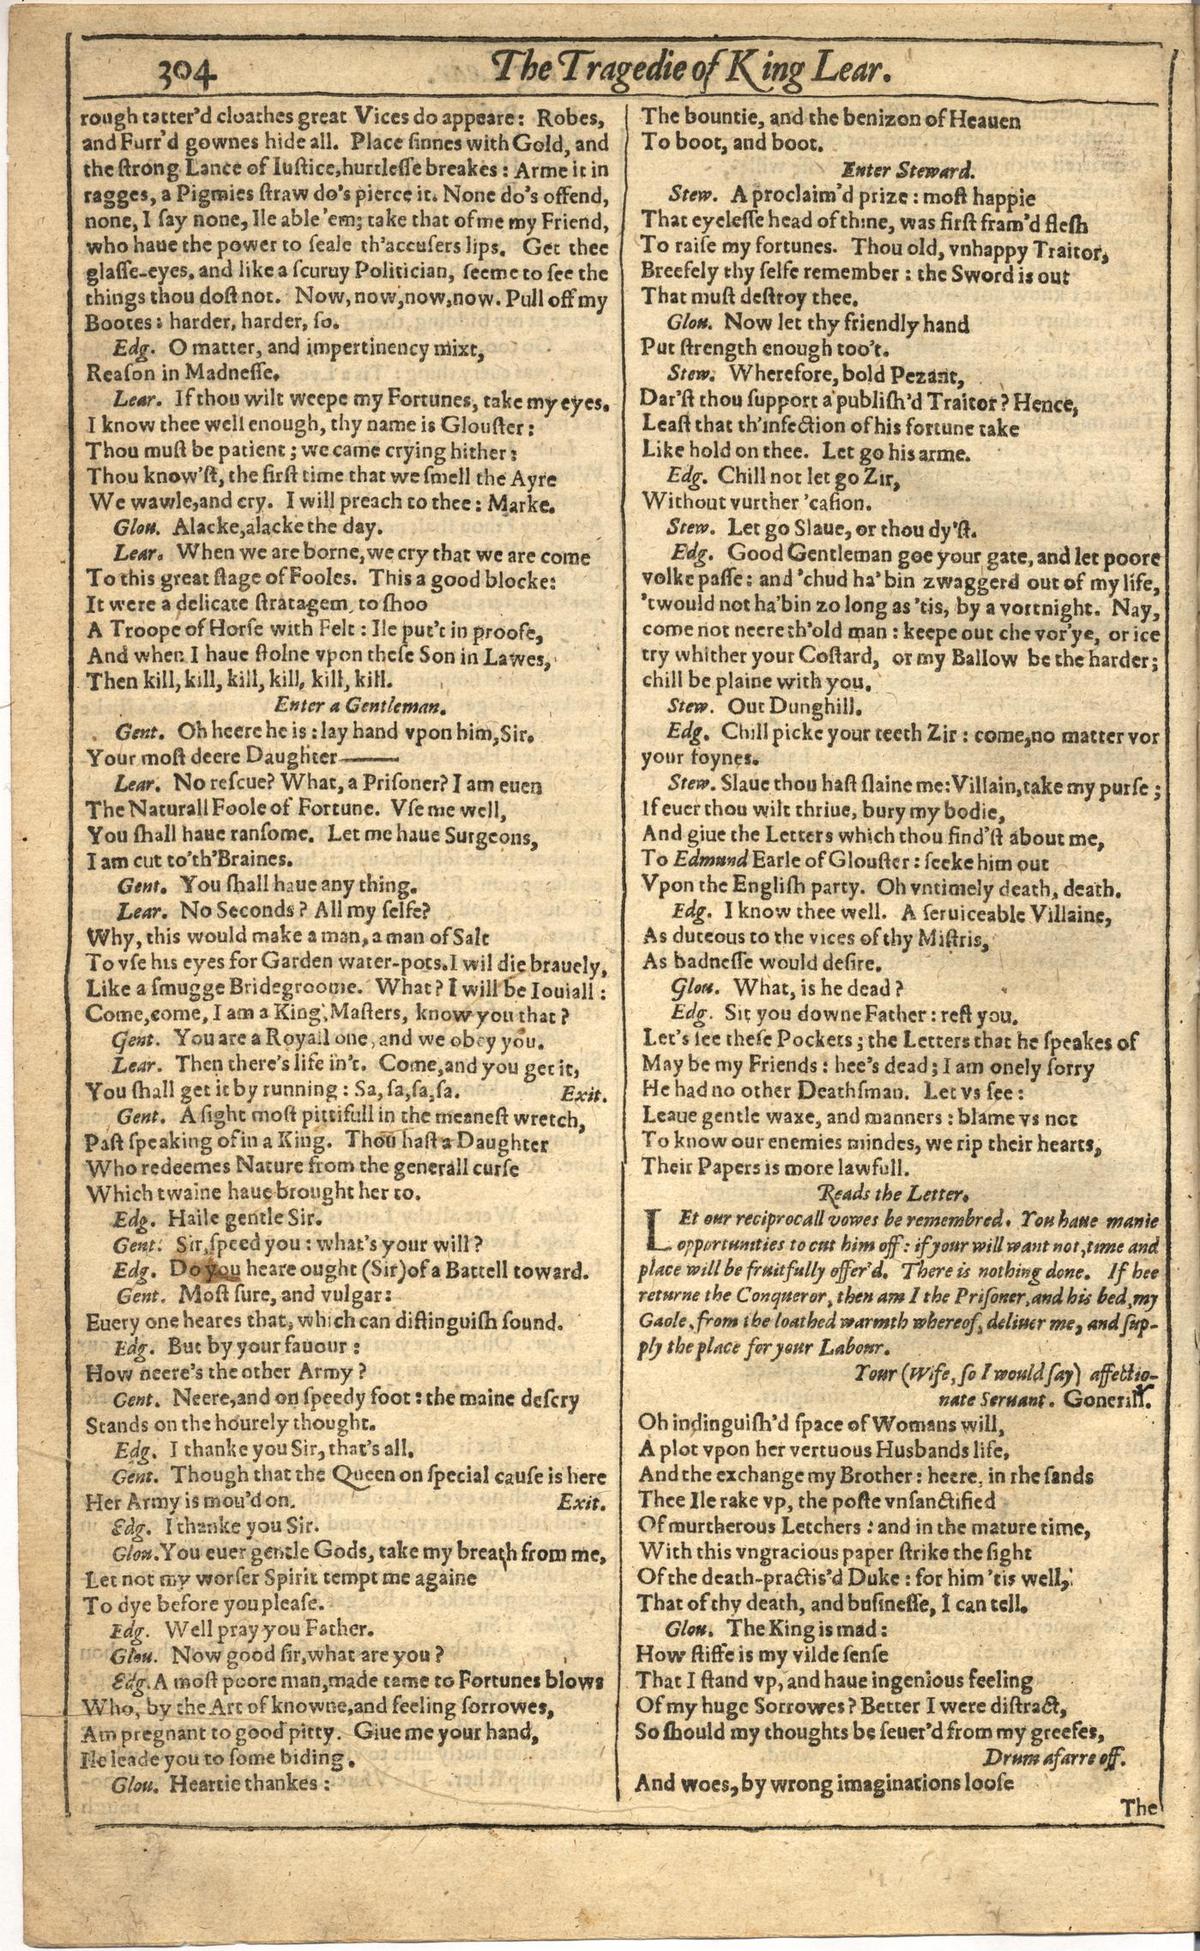 Image of page 812